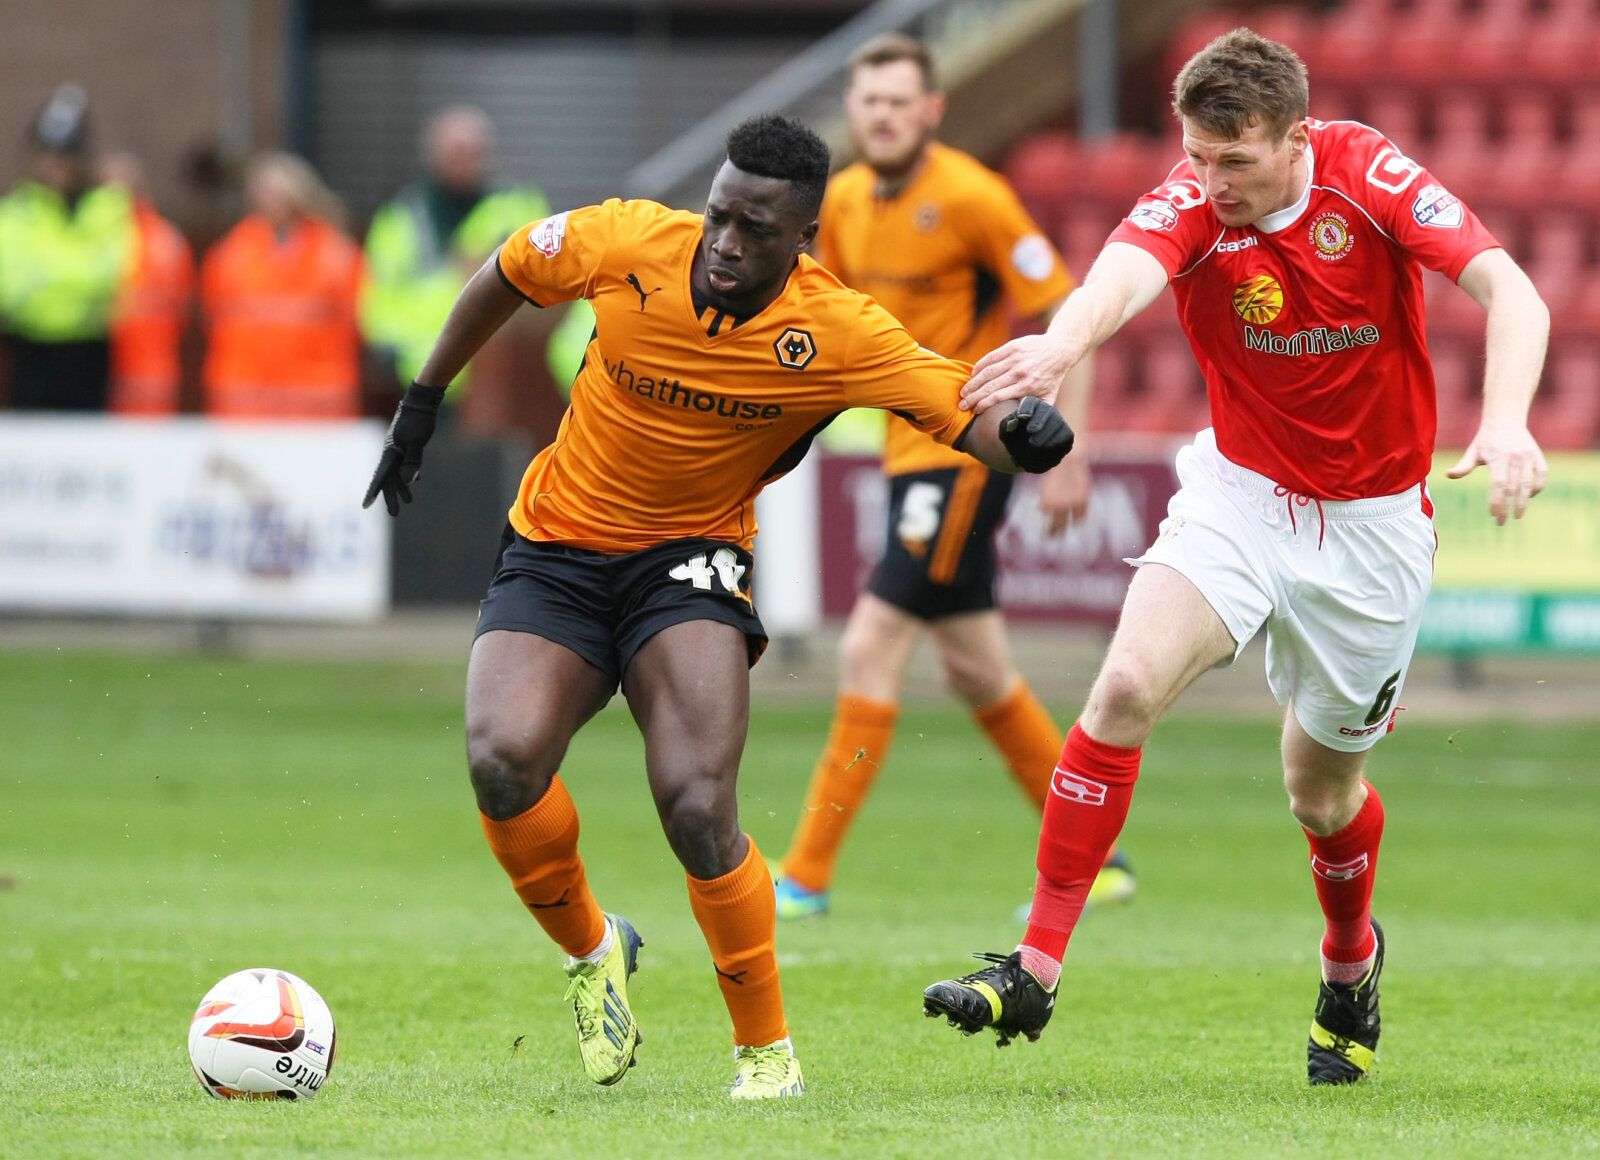 Football - Crewe Alexandra v Wolverhampton Wanderers - Sky Bet Football League One - Alexandra Stadium, Gresty Road - 12/4/14 
Wolves' Nouha Dicko (L) in action with Crewe's Adam Dugdale 
Mandatory Credit: Action Images / Paul Redding 
Livepic 
EDITORIAL USE ONLY. No use with unauthorized audio, video, data, fixture lists, club/league logos or 